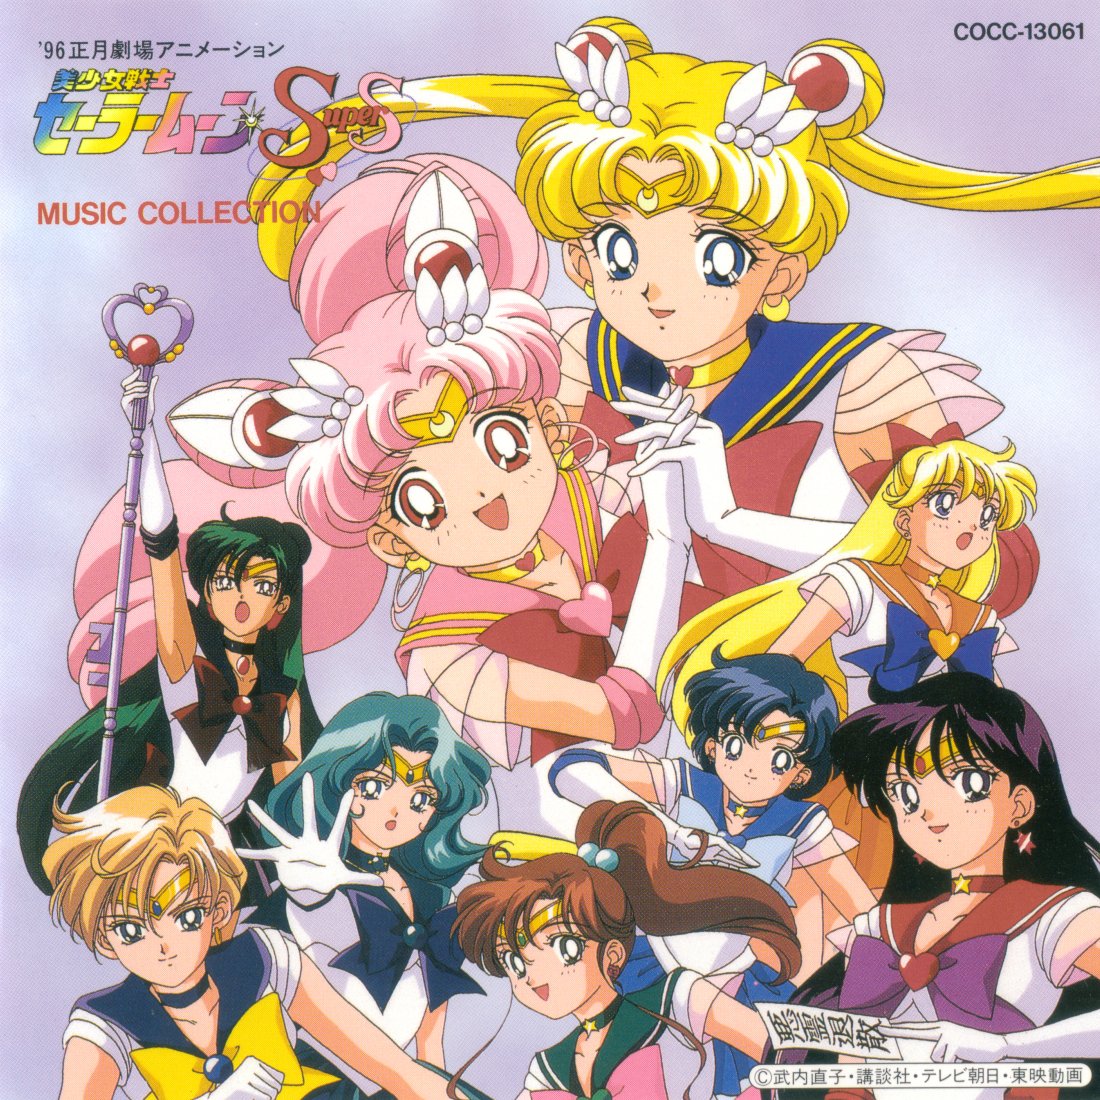 http://sailormusic.net/covers/Sailor%20Moon%20SuperS%20Movie%20Music%20Collection.jpg